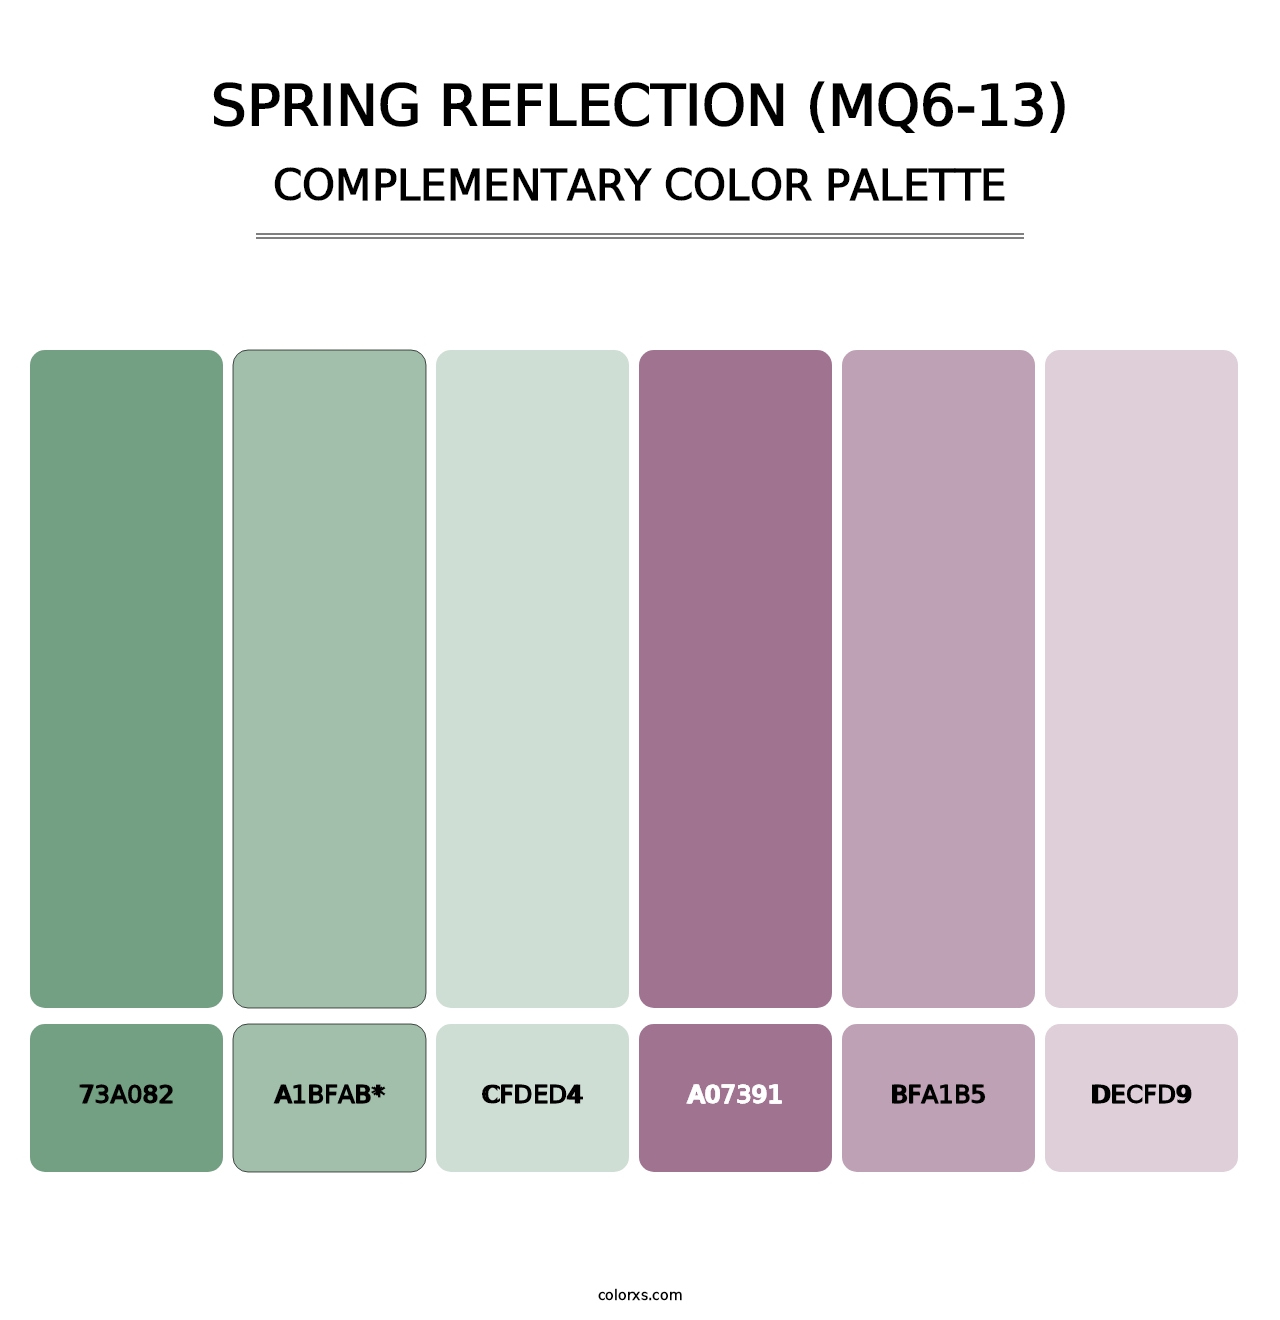 Spring Reflection (MQ6-13) - Complementary Color Palette